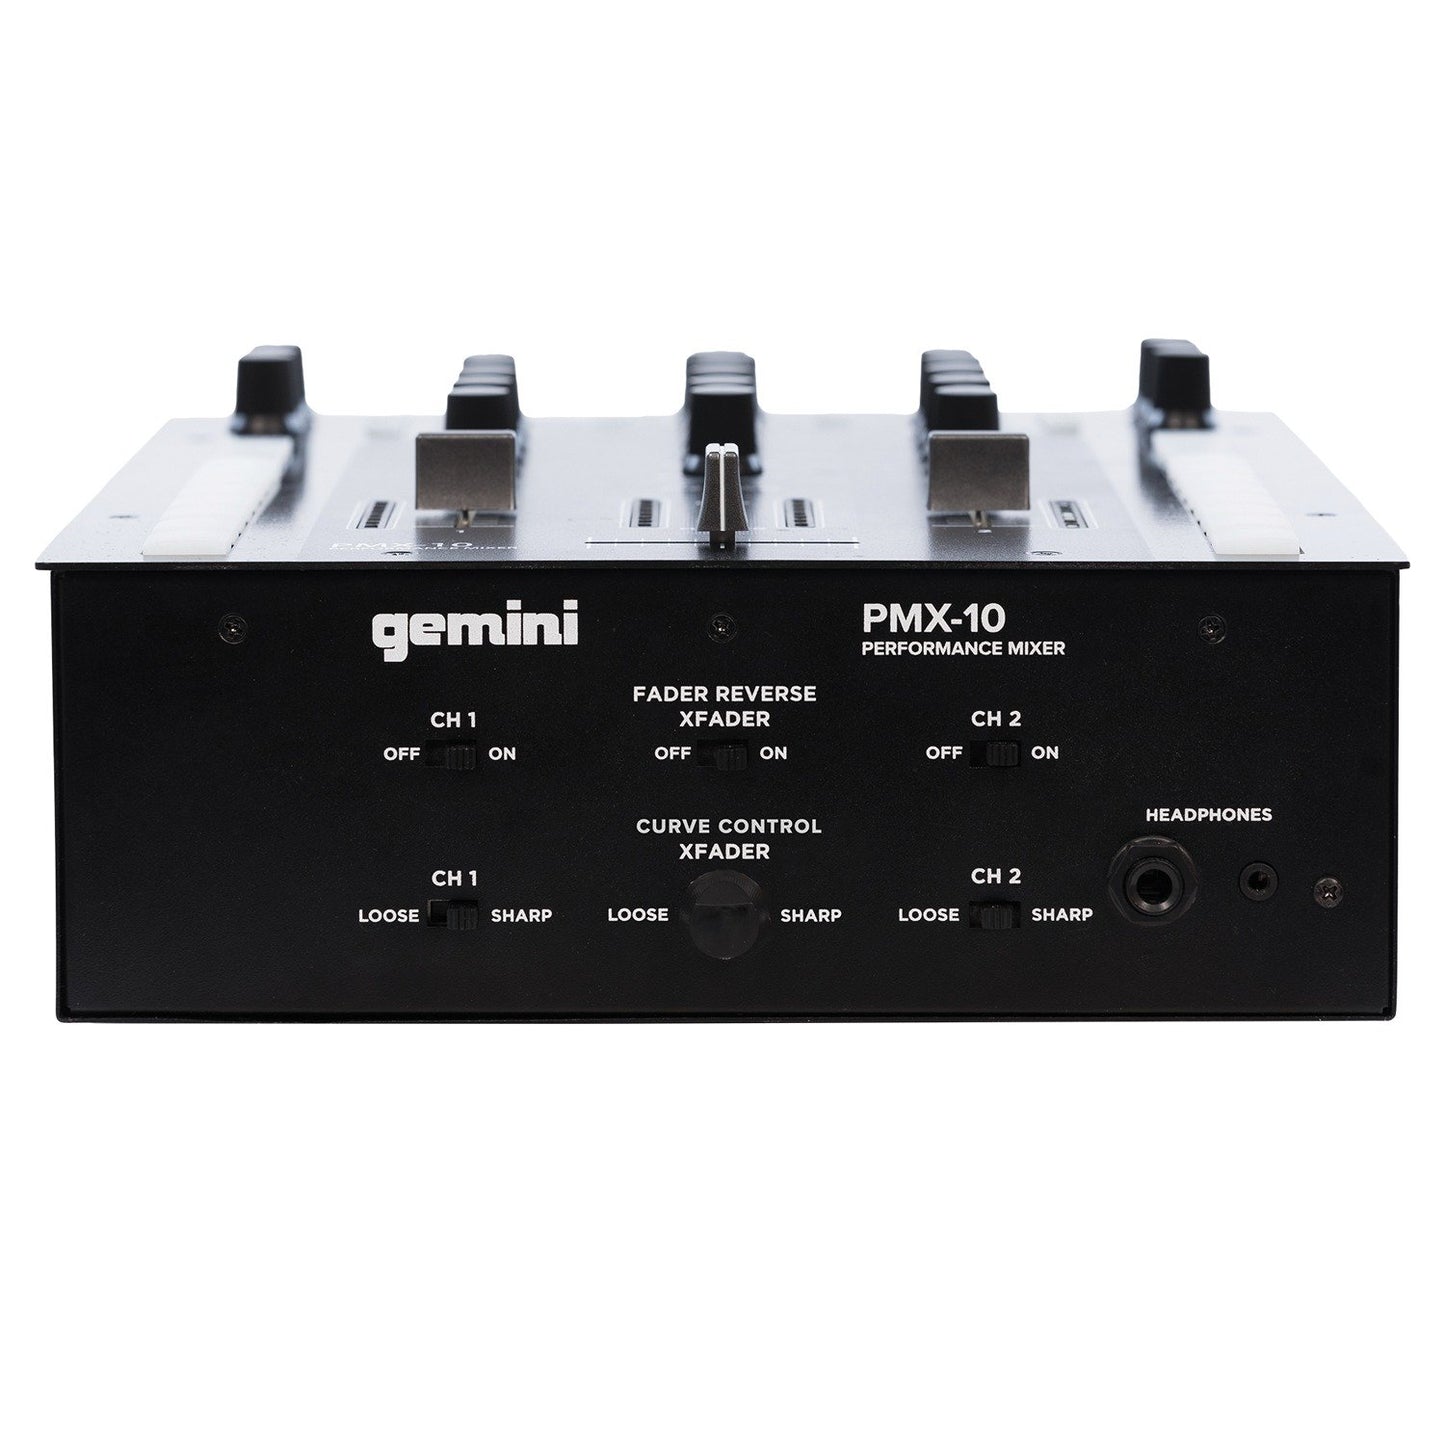 Gemini PMX-10 2-Channel Audio Mixer and DJ Controller